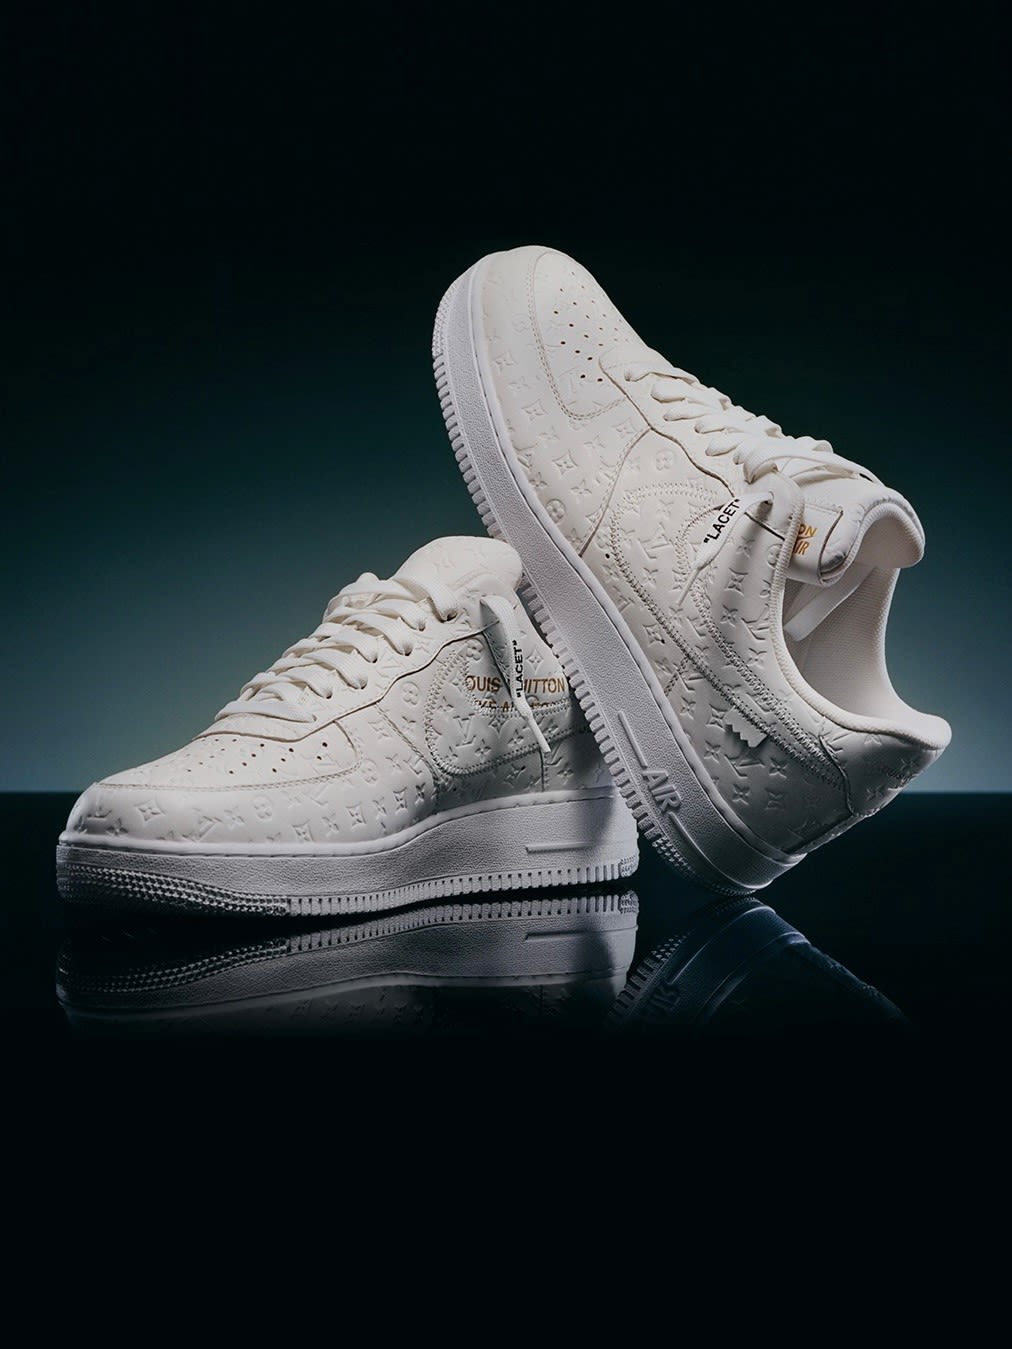 Where to buy Virgil Abloh's Louis Vuitton x Nike Air Force 1 sneaker  collection? Price, release date, and more details explored